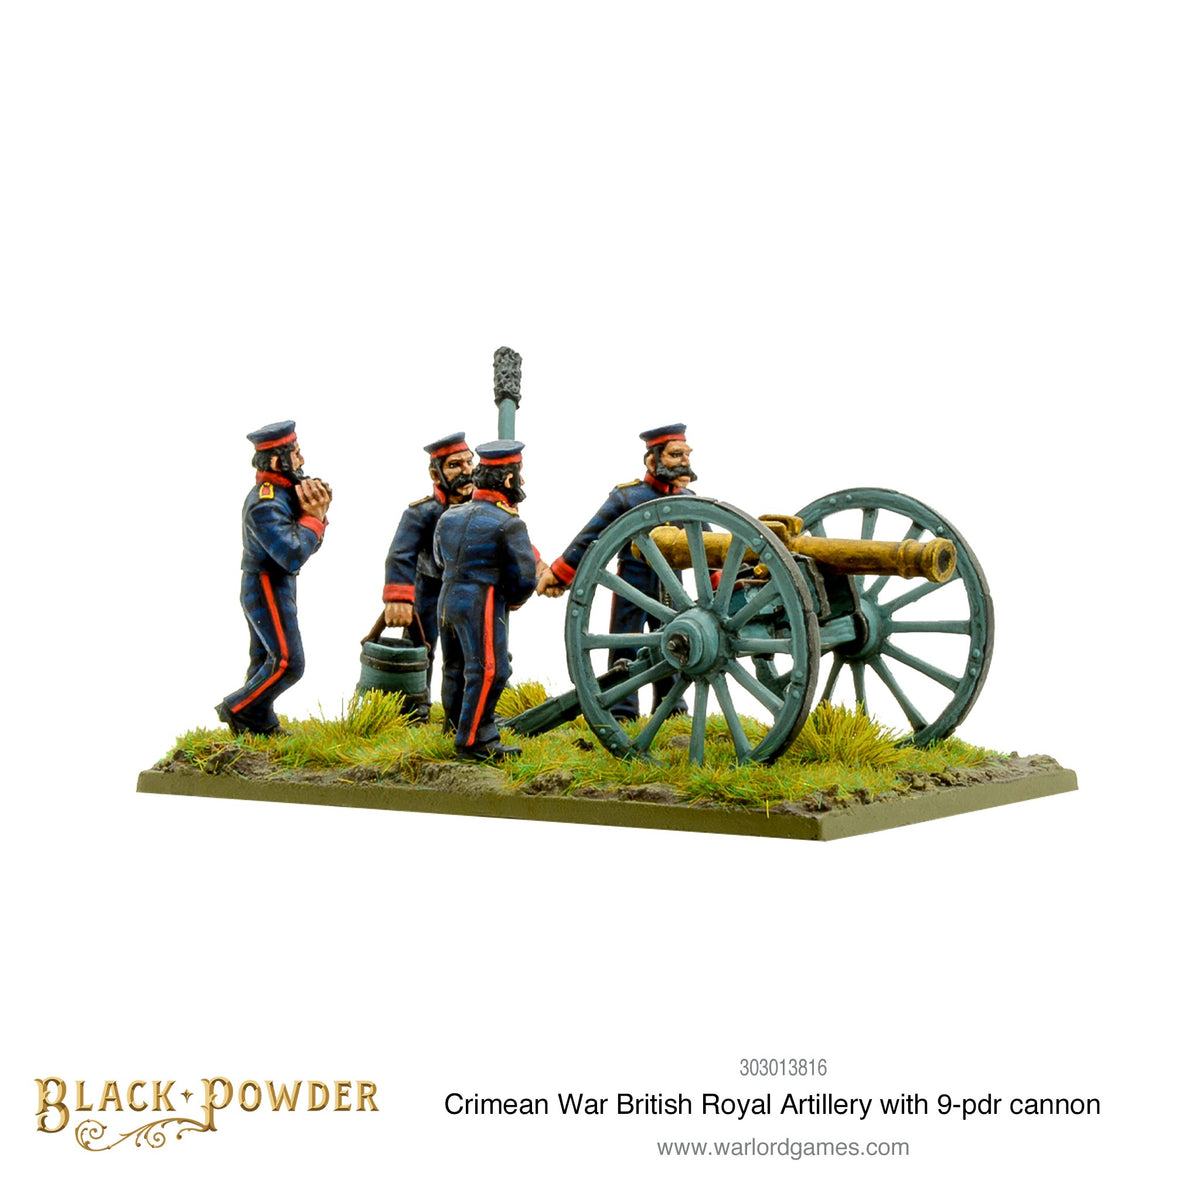 Crimean War British Royal Artillery with 9-pdr cannon